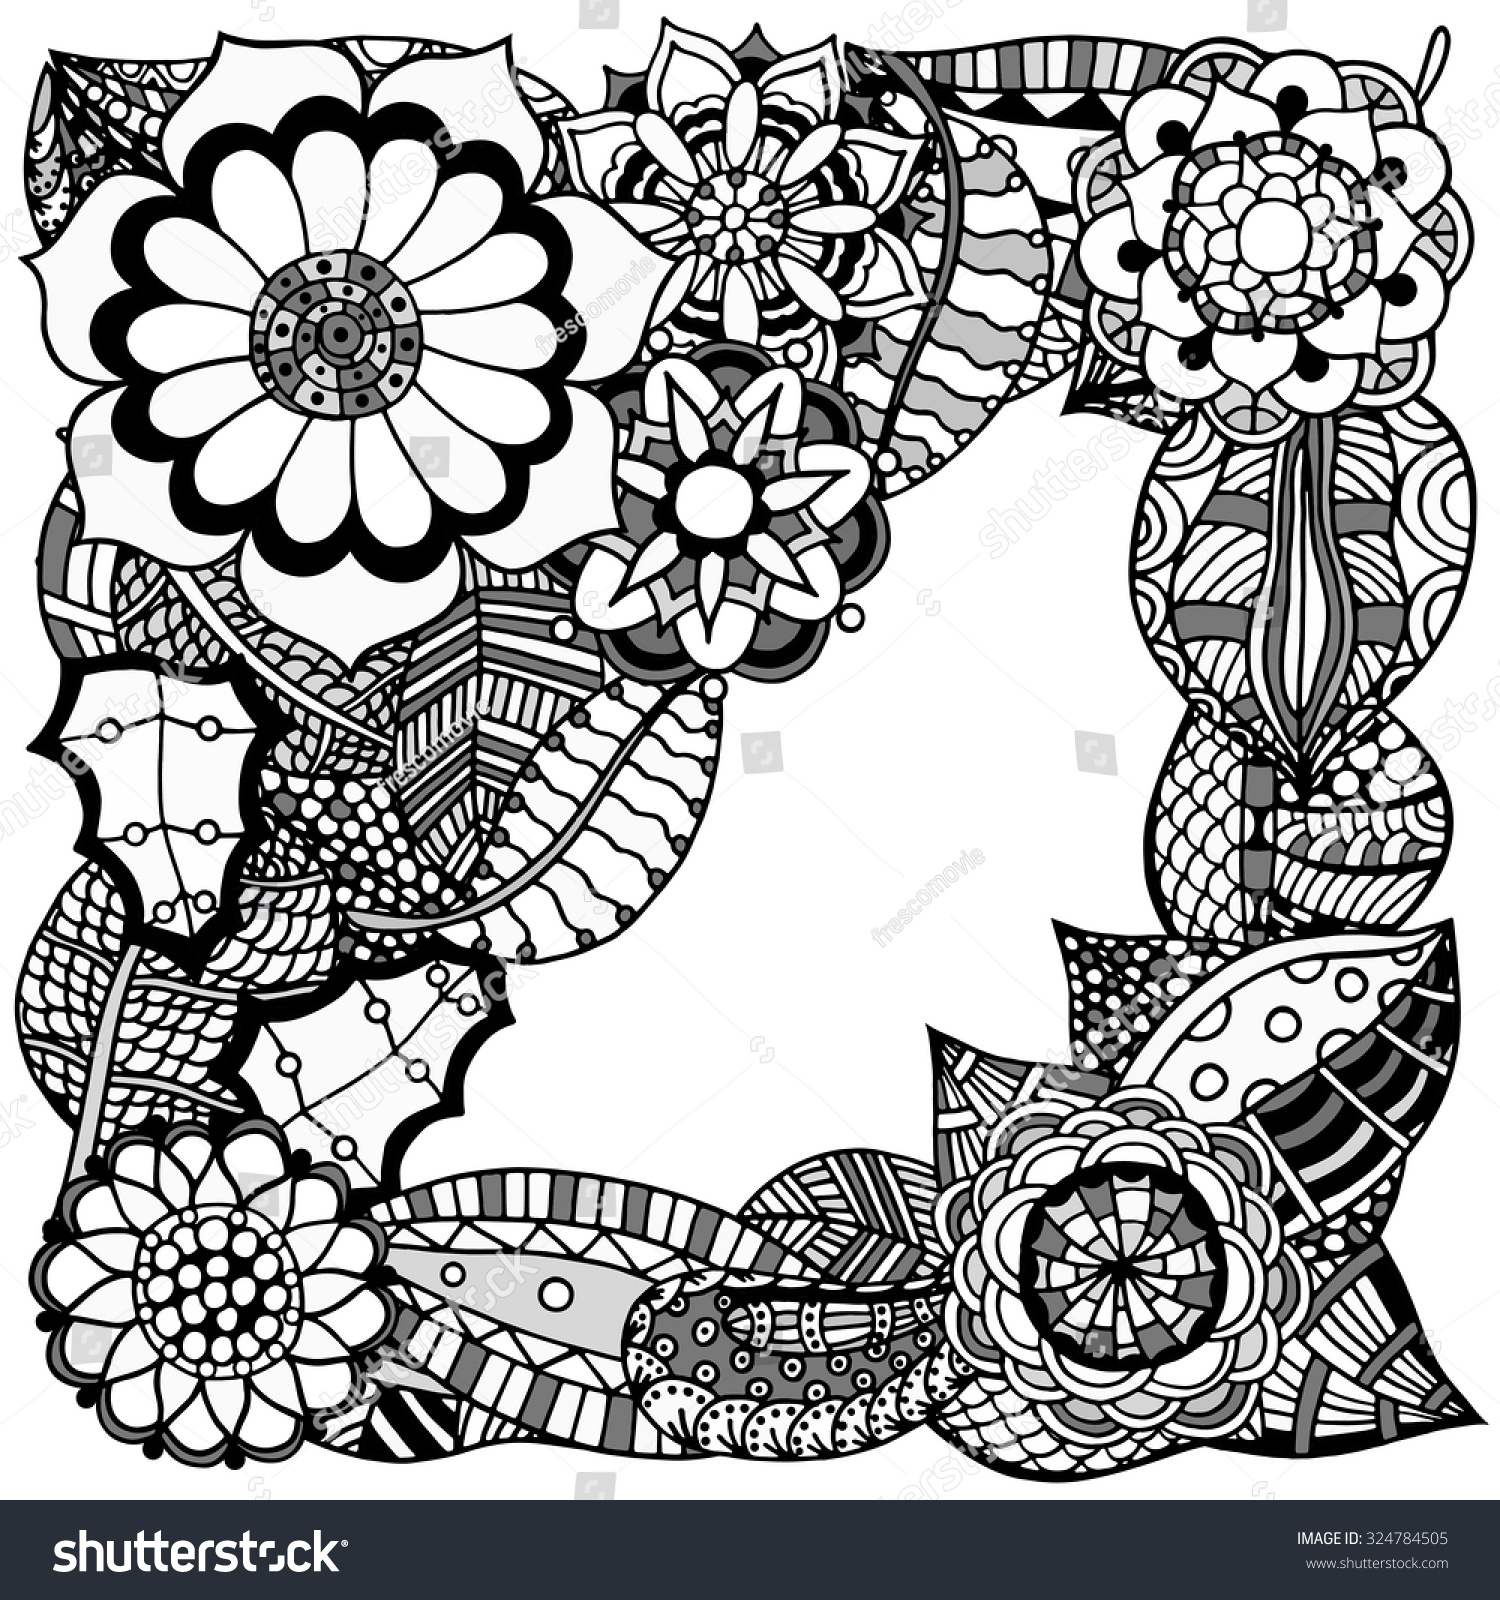 Ornate Floral Pattern Flowers Doodle Sharpie Stock Vector Royalty